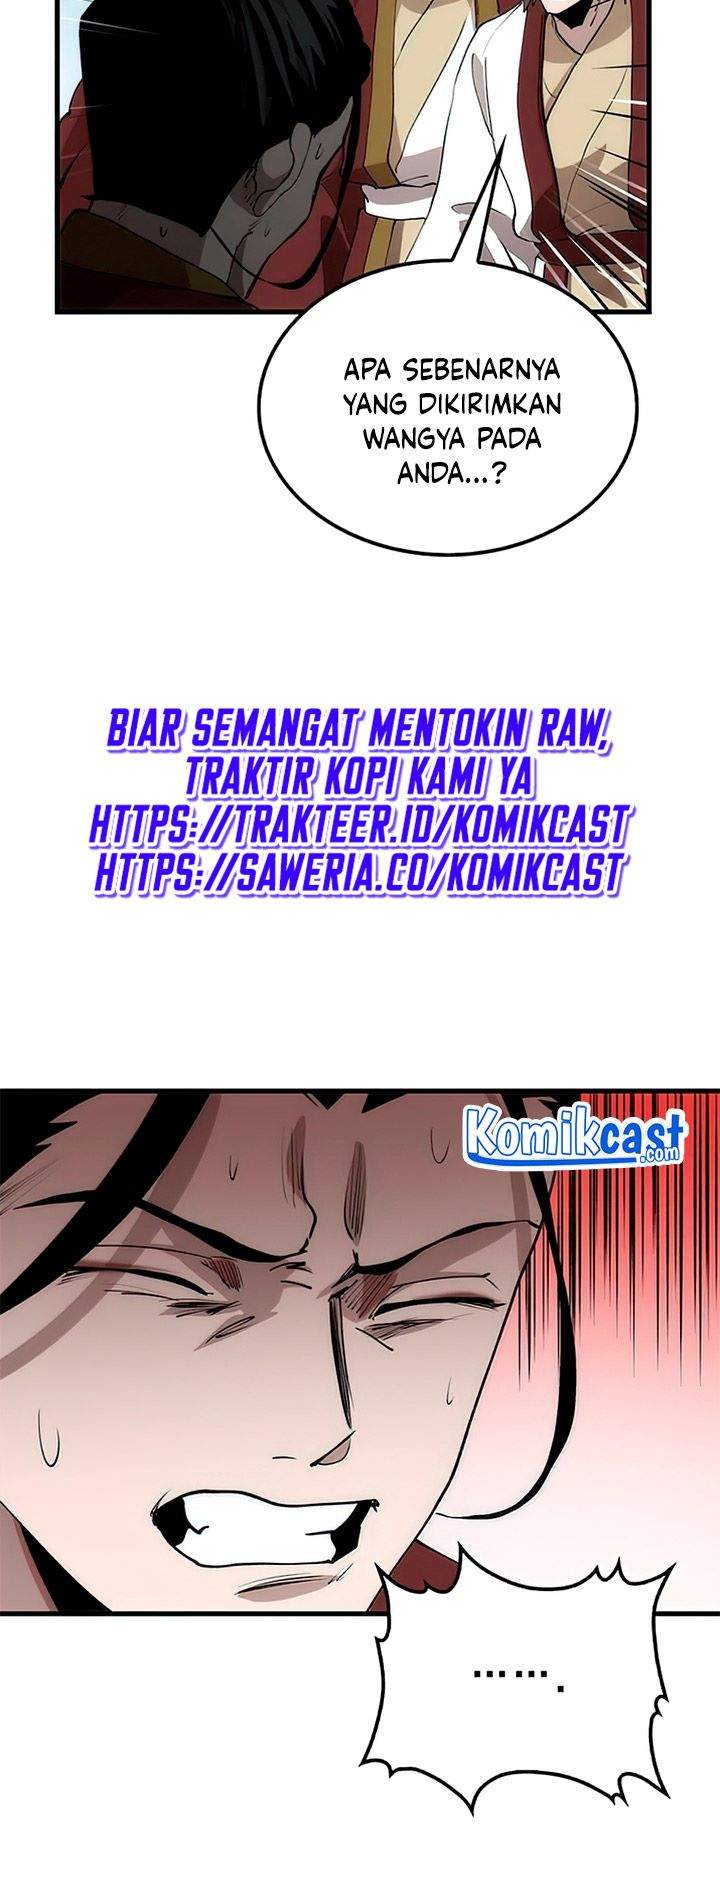 Doctor’s Rebirth Chapter 54